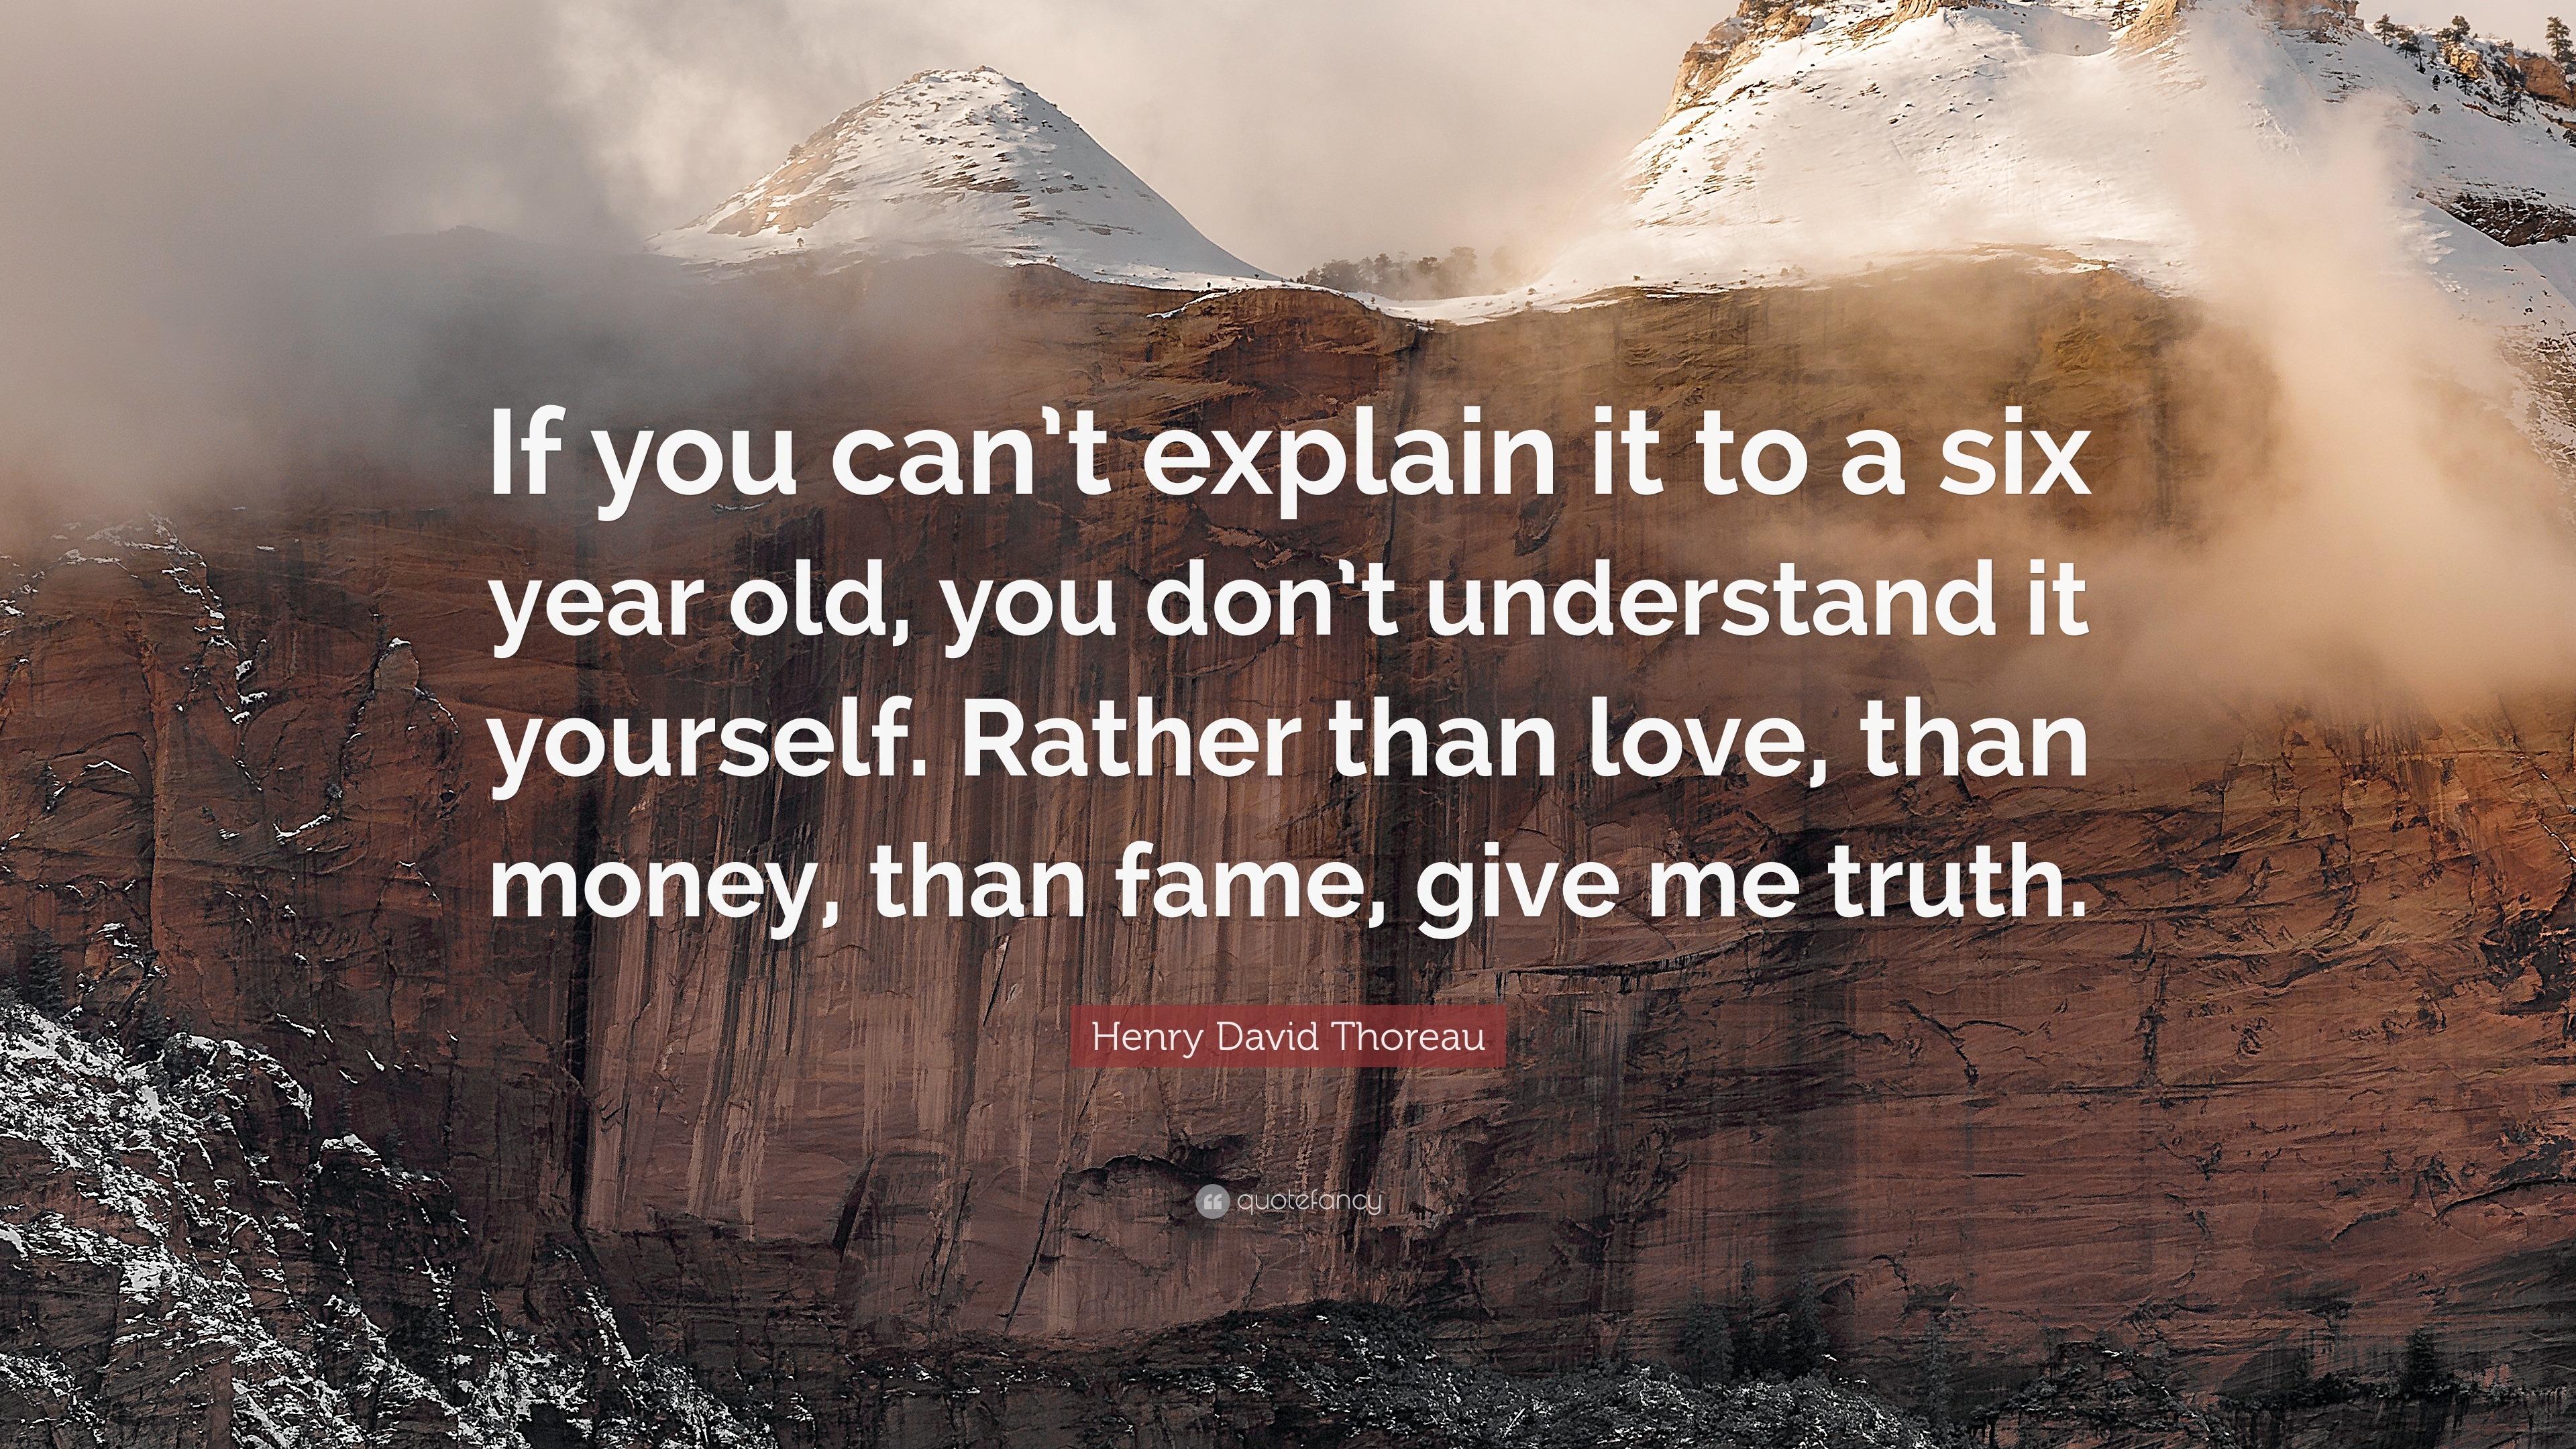 Henry David Thoreau Quote “If you can t explain it to a six